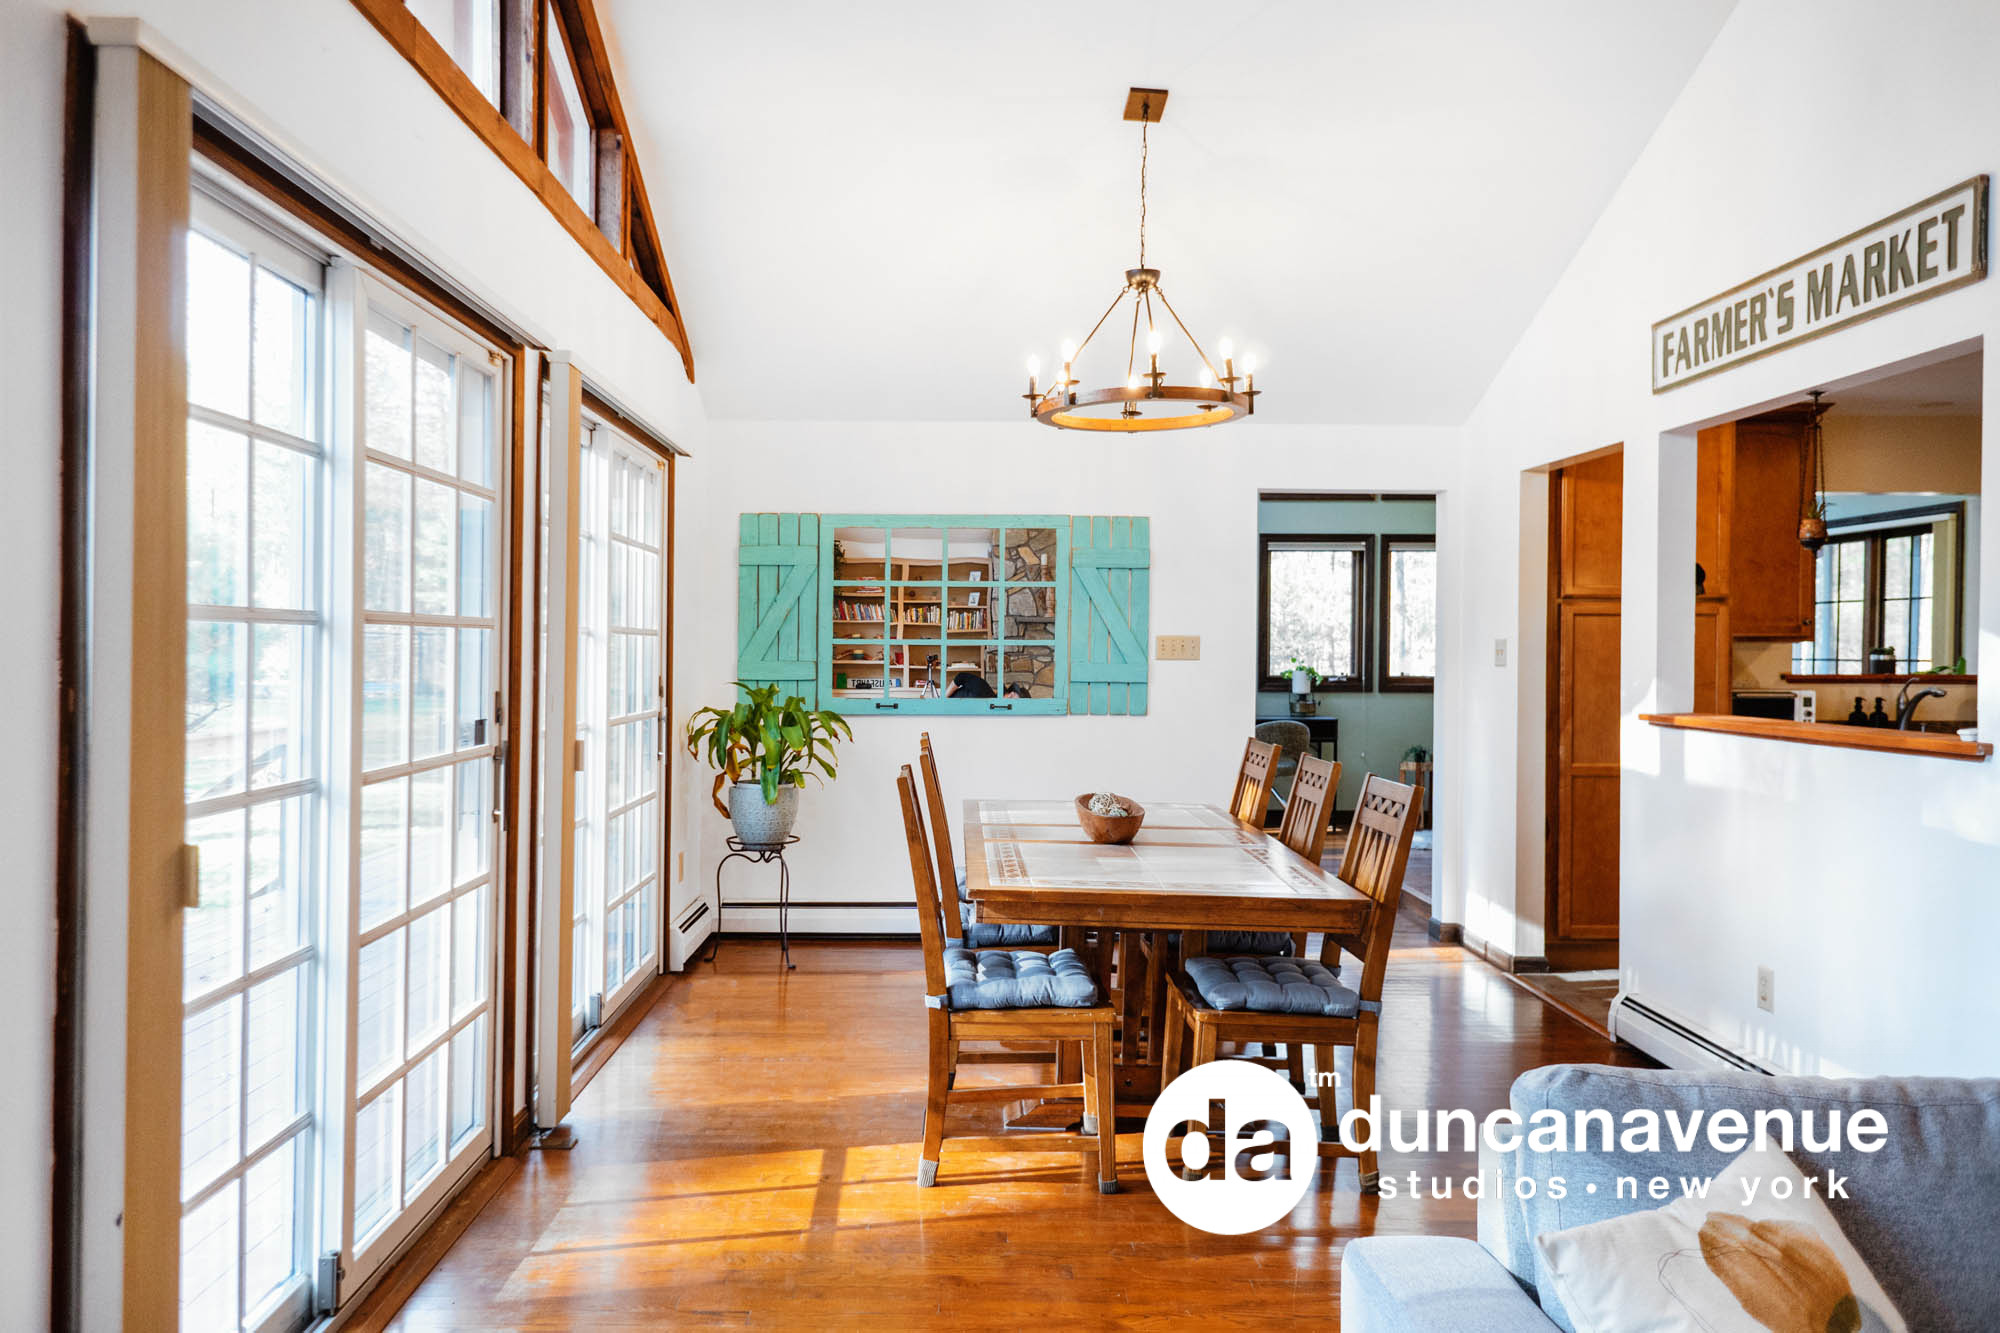 Airbnb Listing in Hudson, NY – Travel Lifestyle Photography by Maxwell Alexander for Alluvion Media